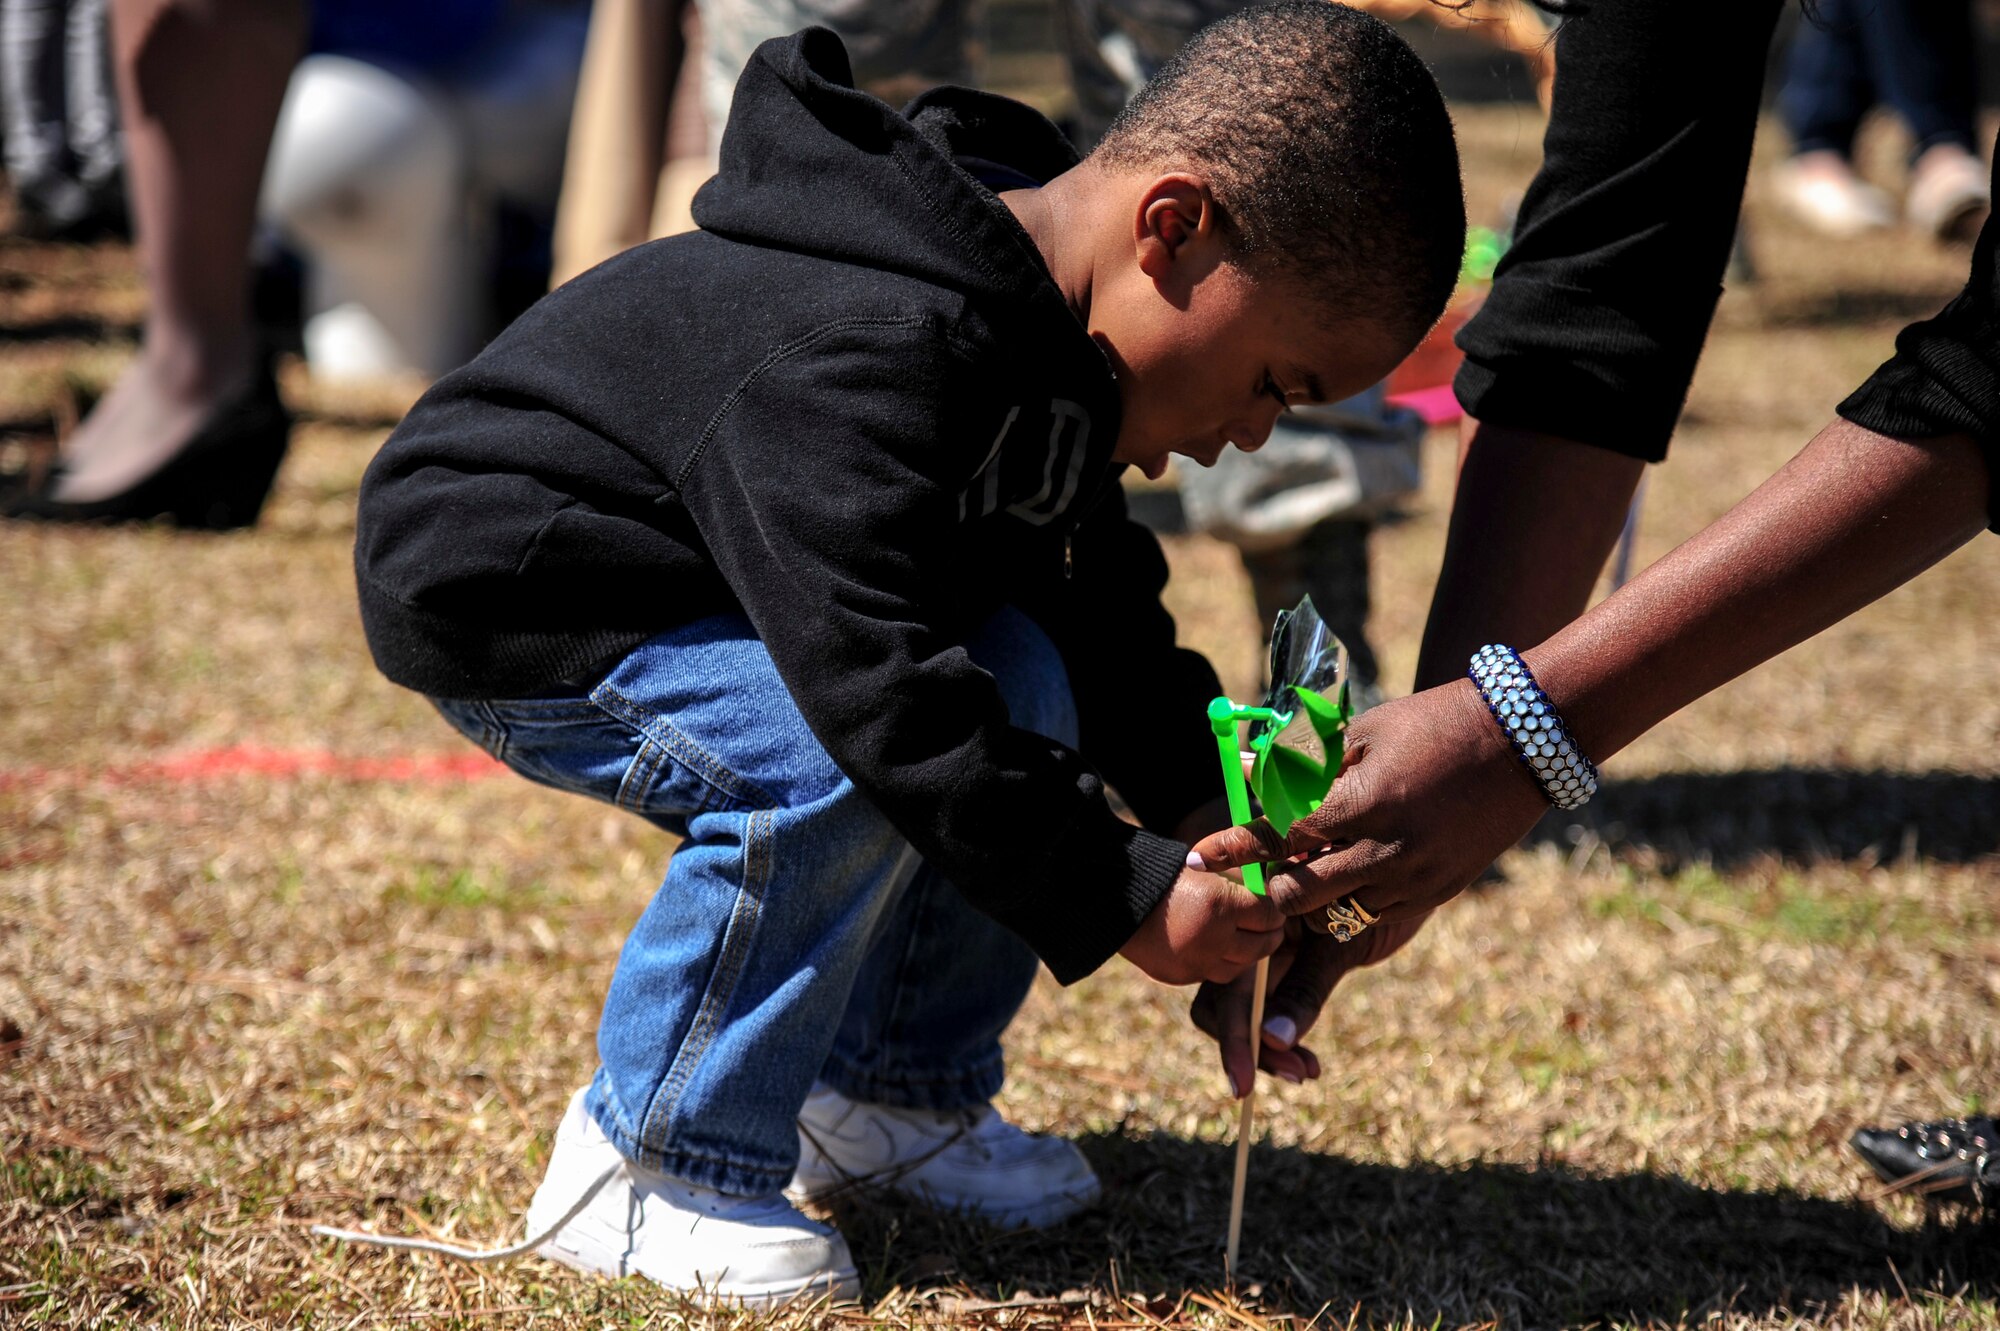 Members of Team Seymour plant pinwheels during a “Pinwheels for Child Abuse Prevention” event, April 1, 2015, at Seymour Johnson Air Force Base, North Carolina. The pinwheel stands as a symbol of hope for children across that nation that they will never endure abuse or neglect. (U.S Air Force photo/Senior Airman Brittain Crolley)